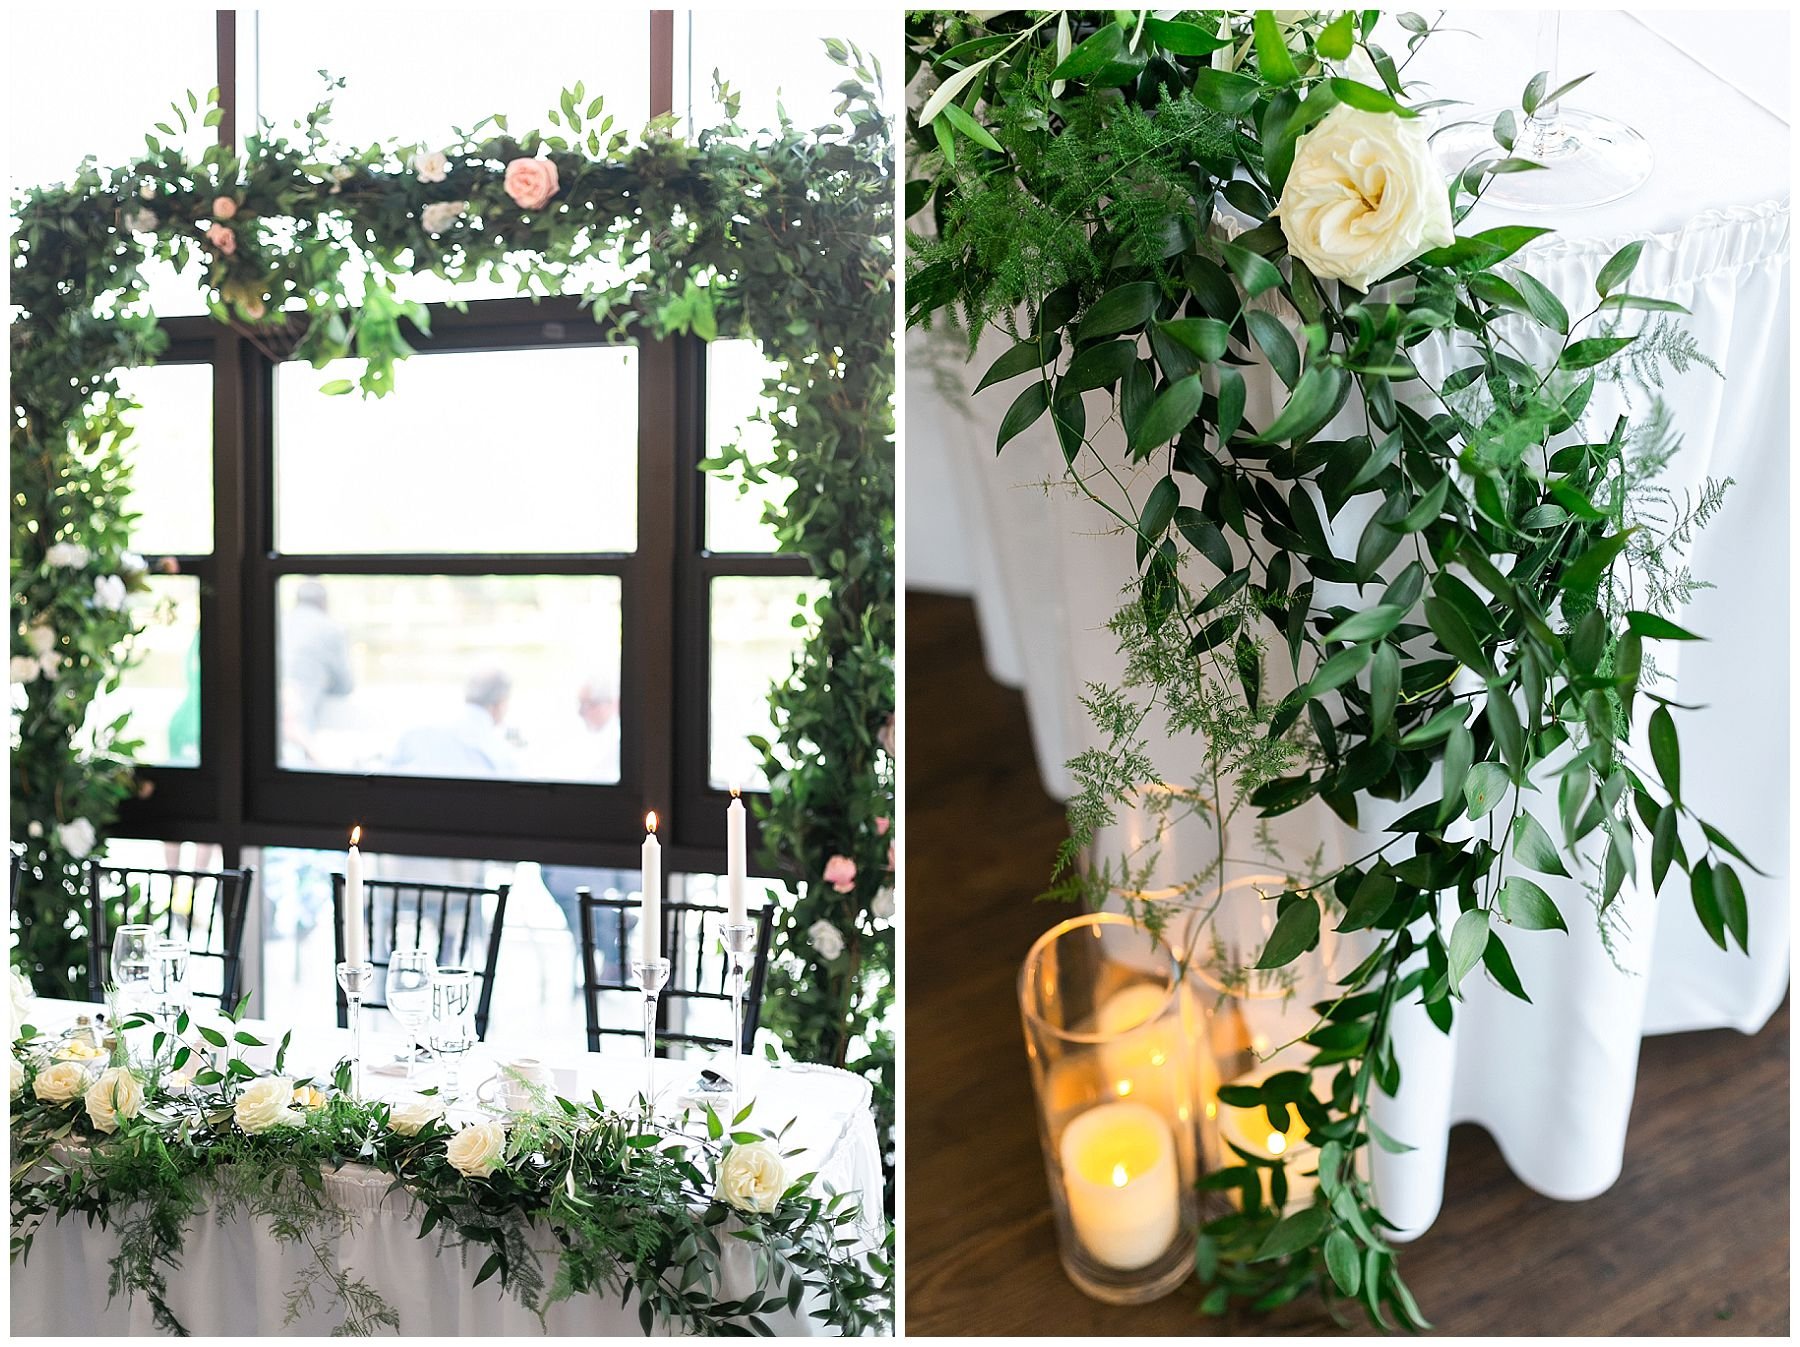 Wedding table decor. Garland of greenery and white roses with candlesticks. With an arch of greenery. 